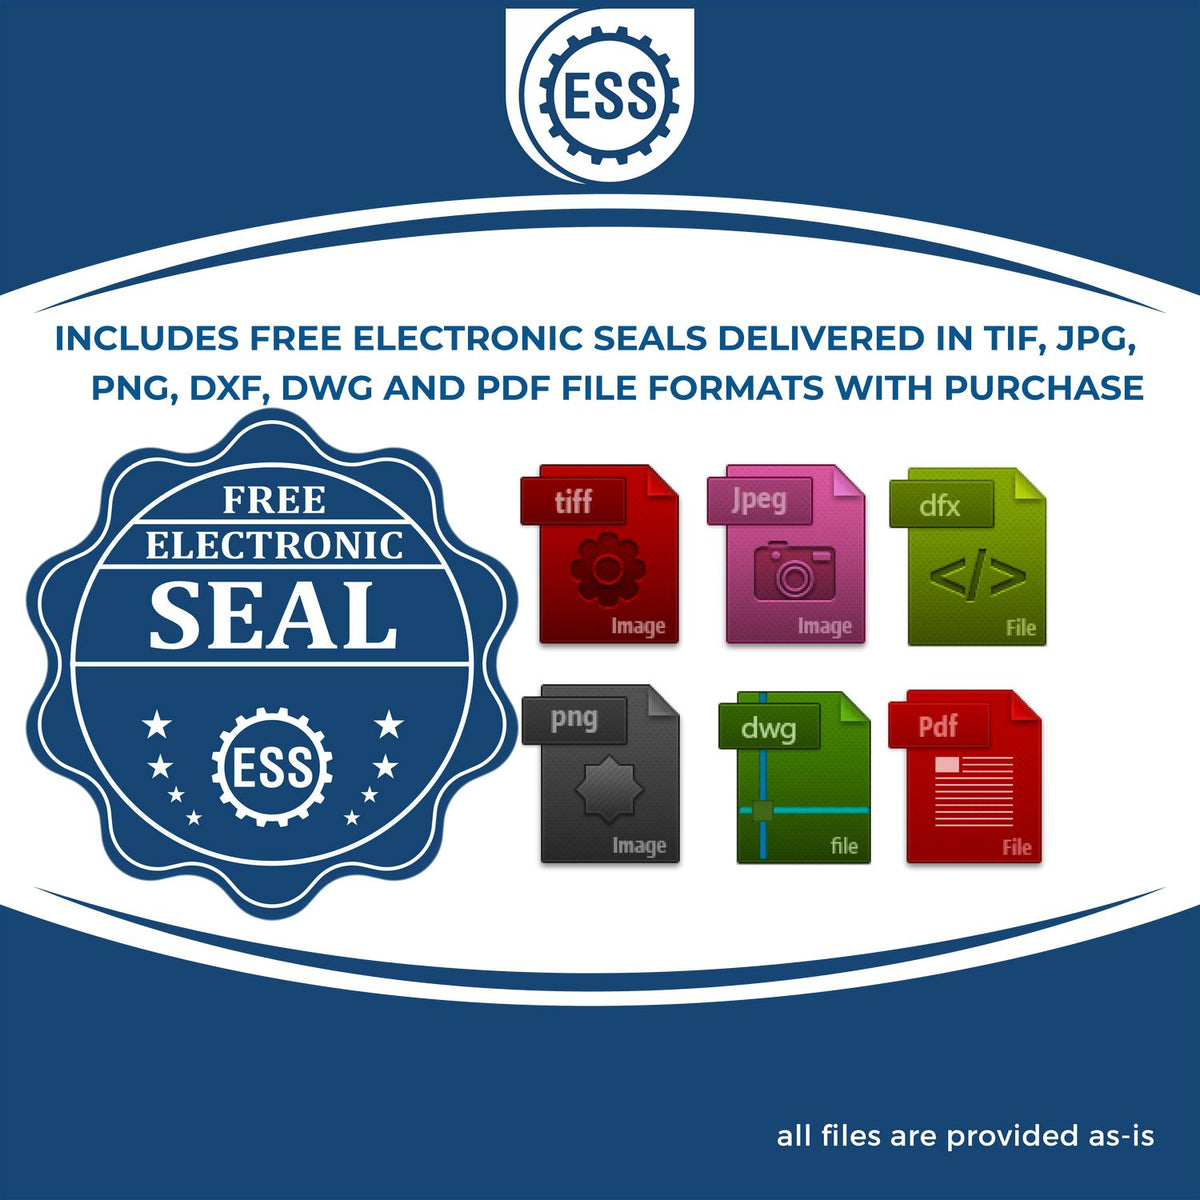 An infographic for the free electronic seal for the Self-Inking Rectangular North Dakota Notary Stamp illustrating the different file type icons such as DXF, DWG, TIF, JPG and PNG.